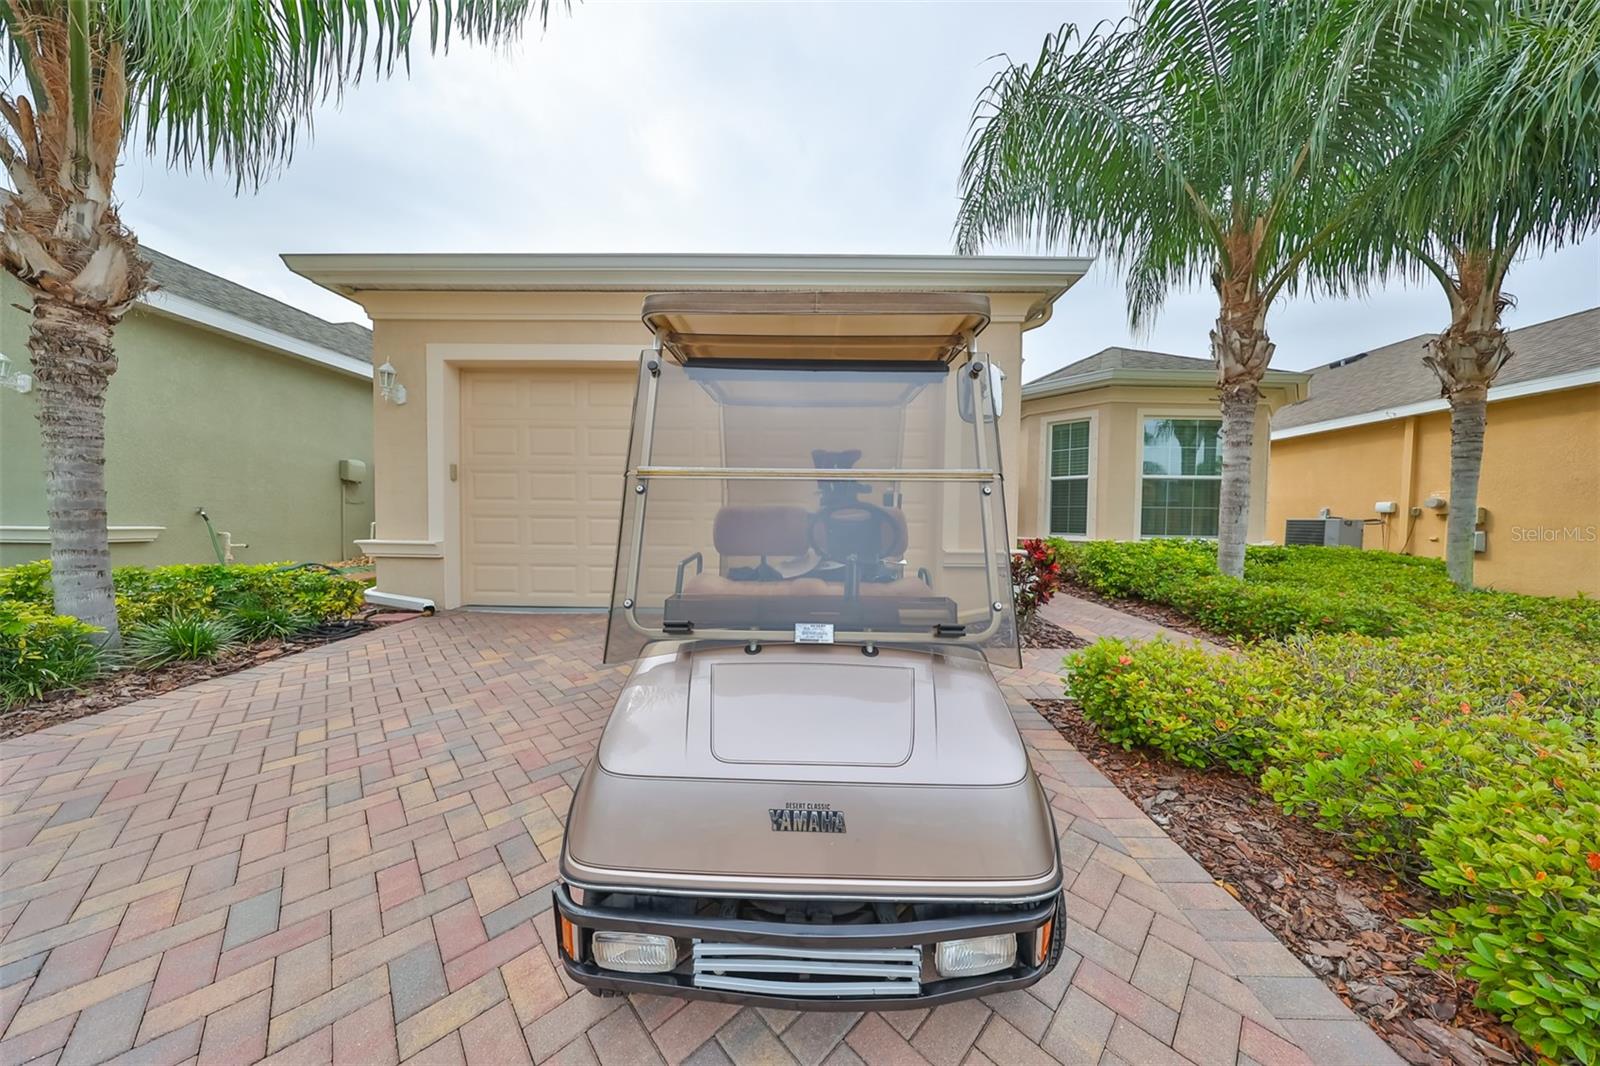 Golf Cart is a 1997 Club Car, which has been VERY well maintained and looks exceptional.